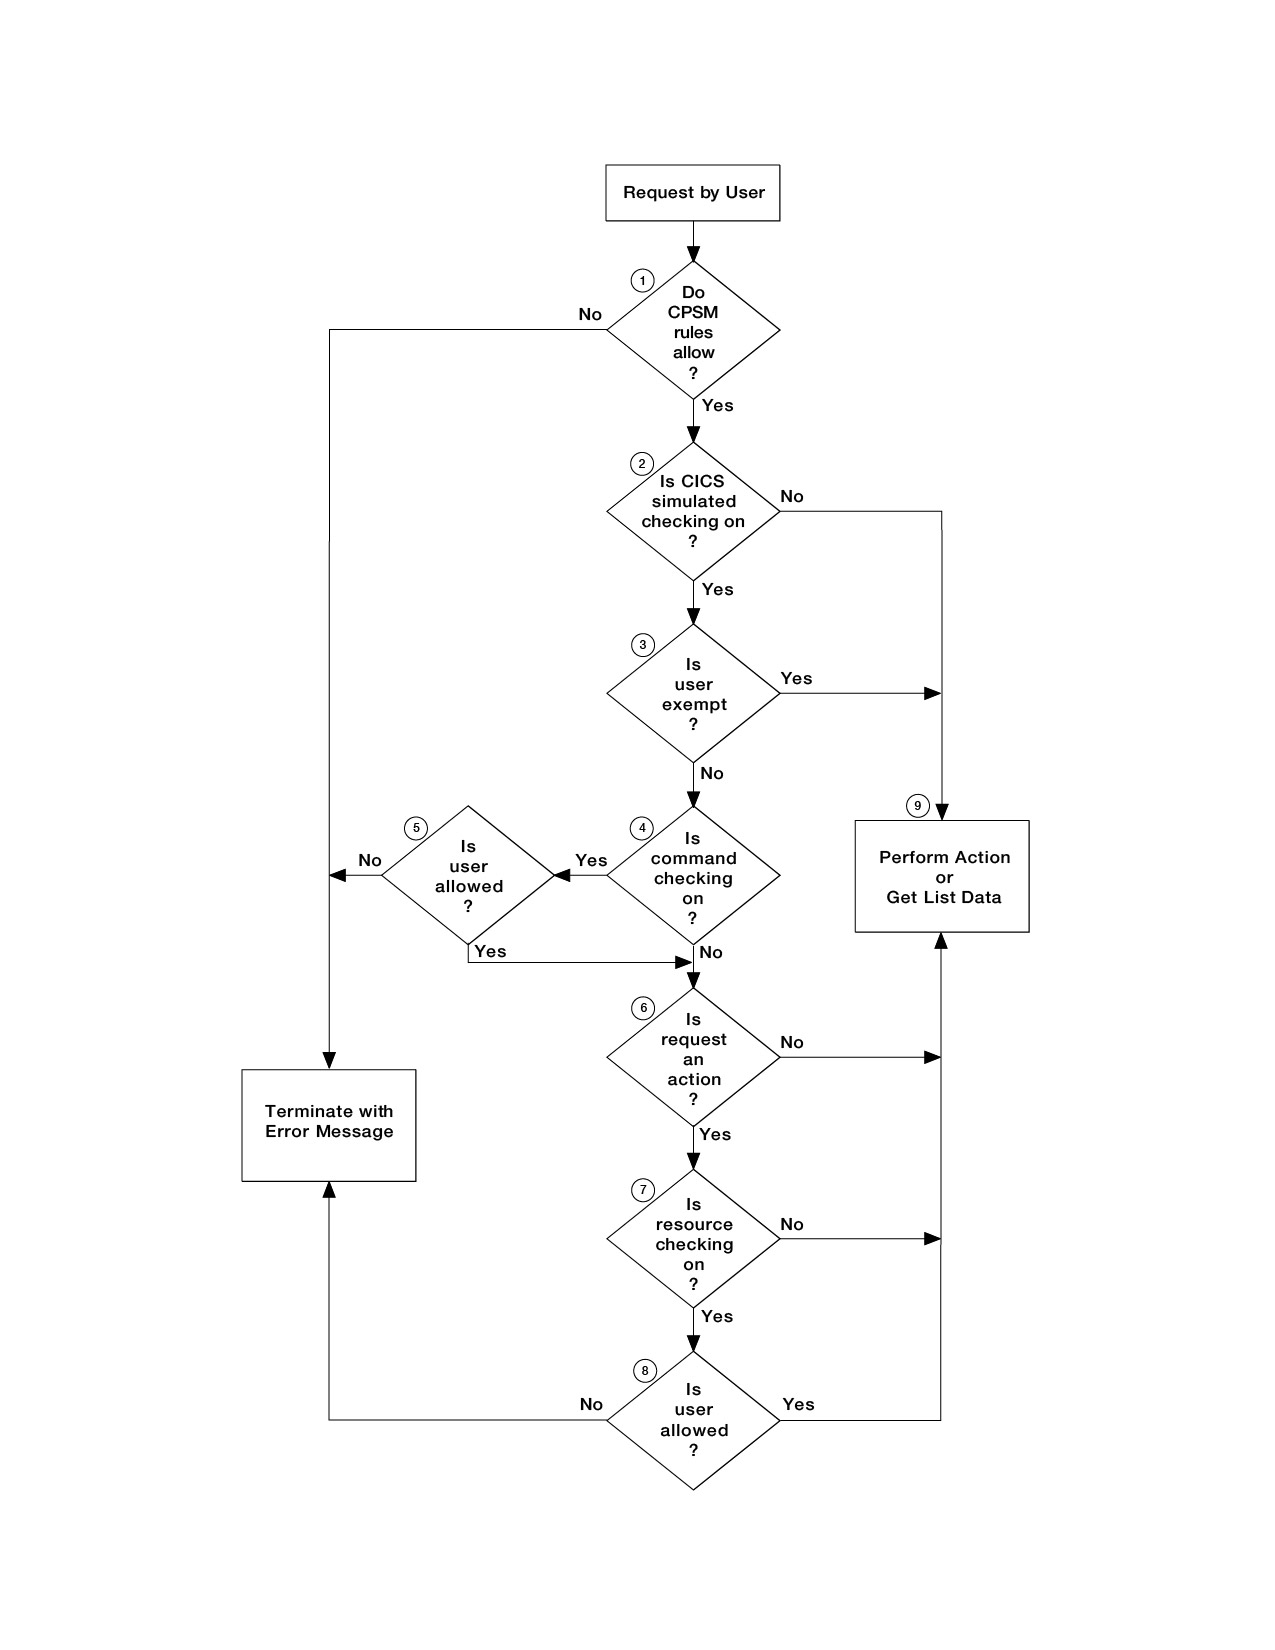 This flowchart shows the first part of the security checking sequence described in the text.